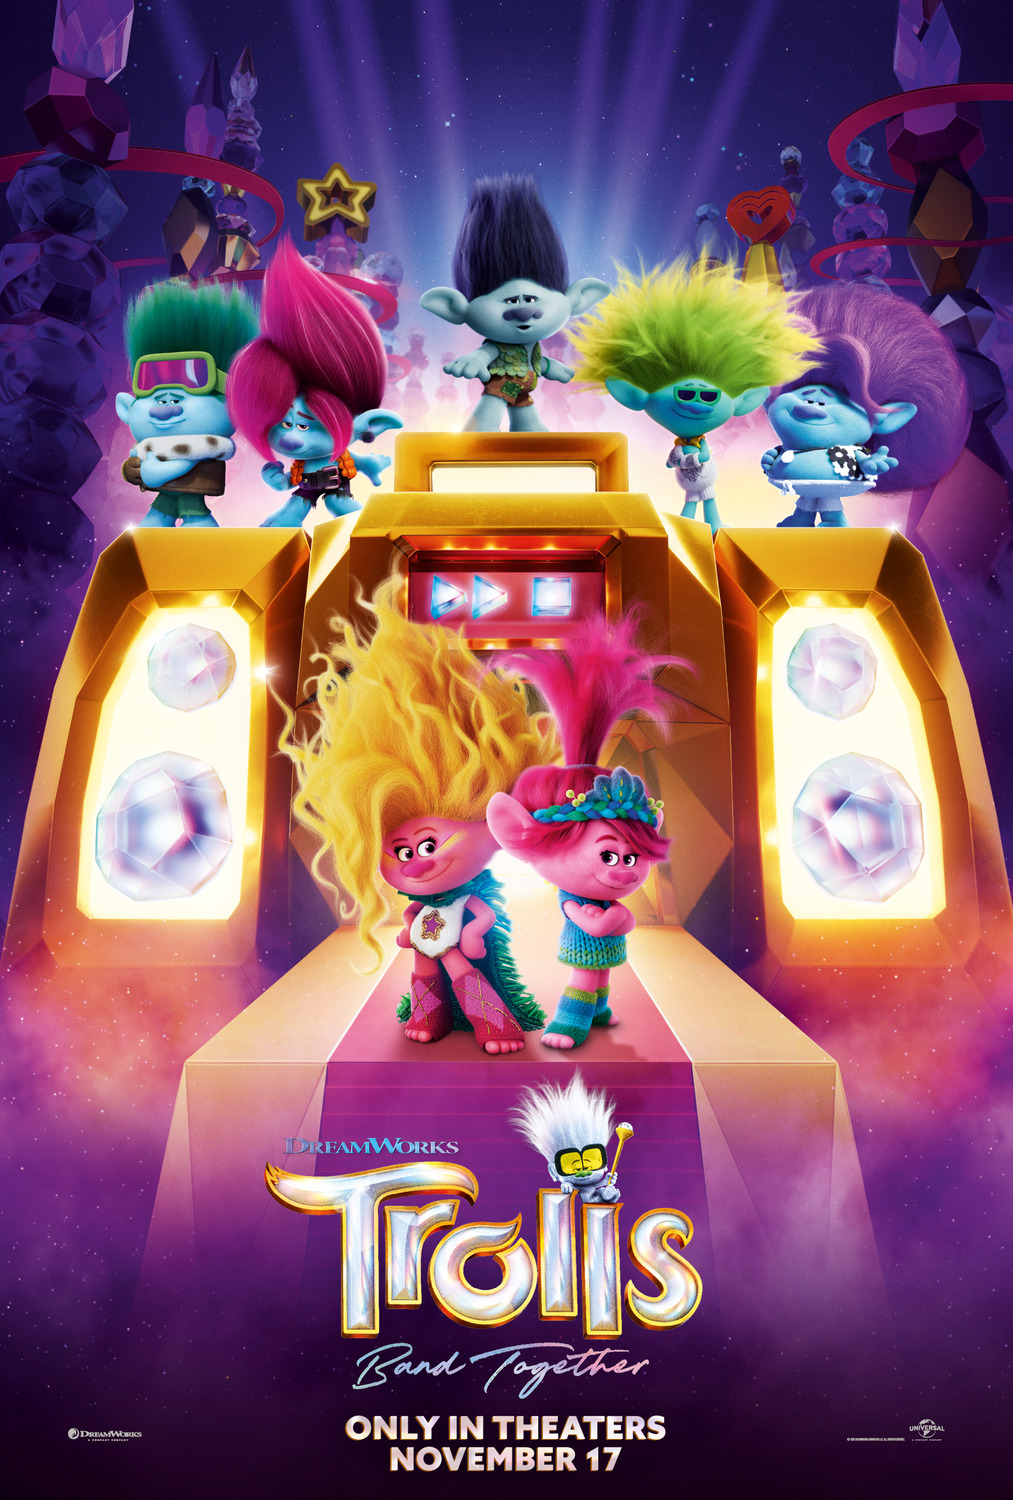 Extra Large Movie Poster Image for Trolls Band Together (#3 of 6)